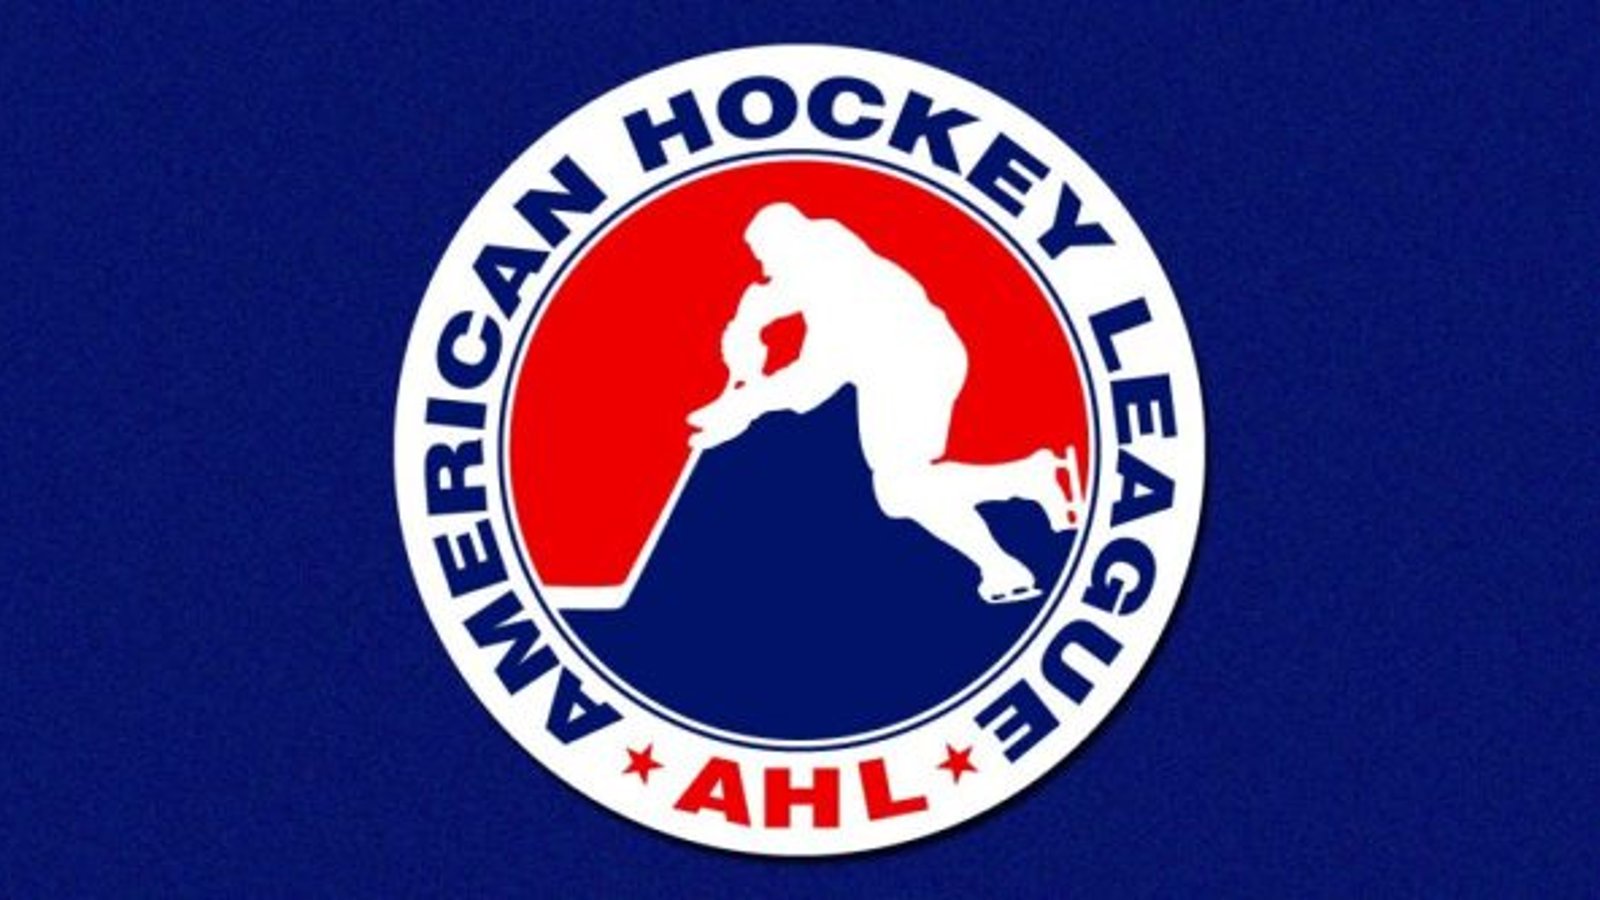 The AHL is cancelling its season